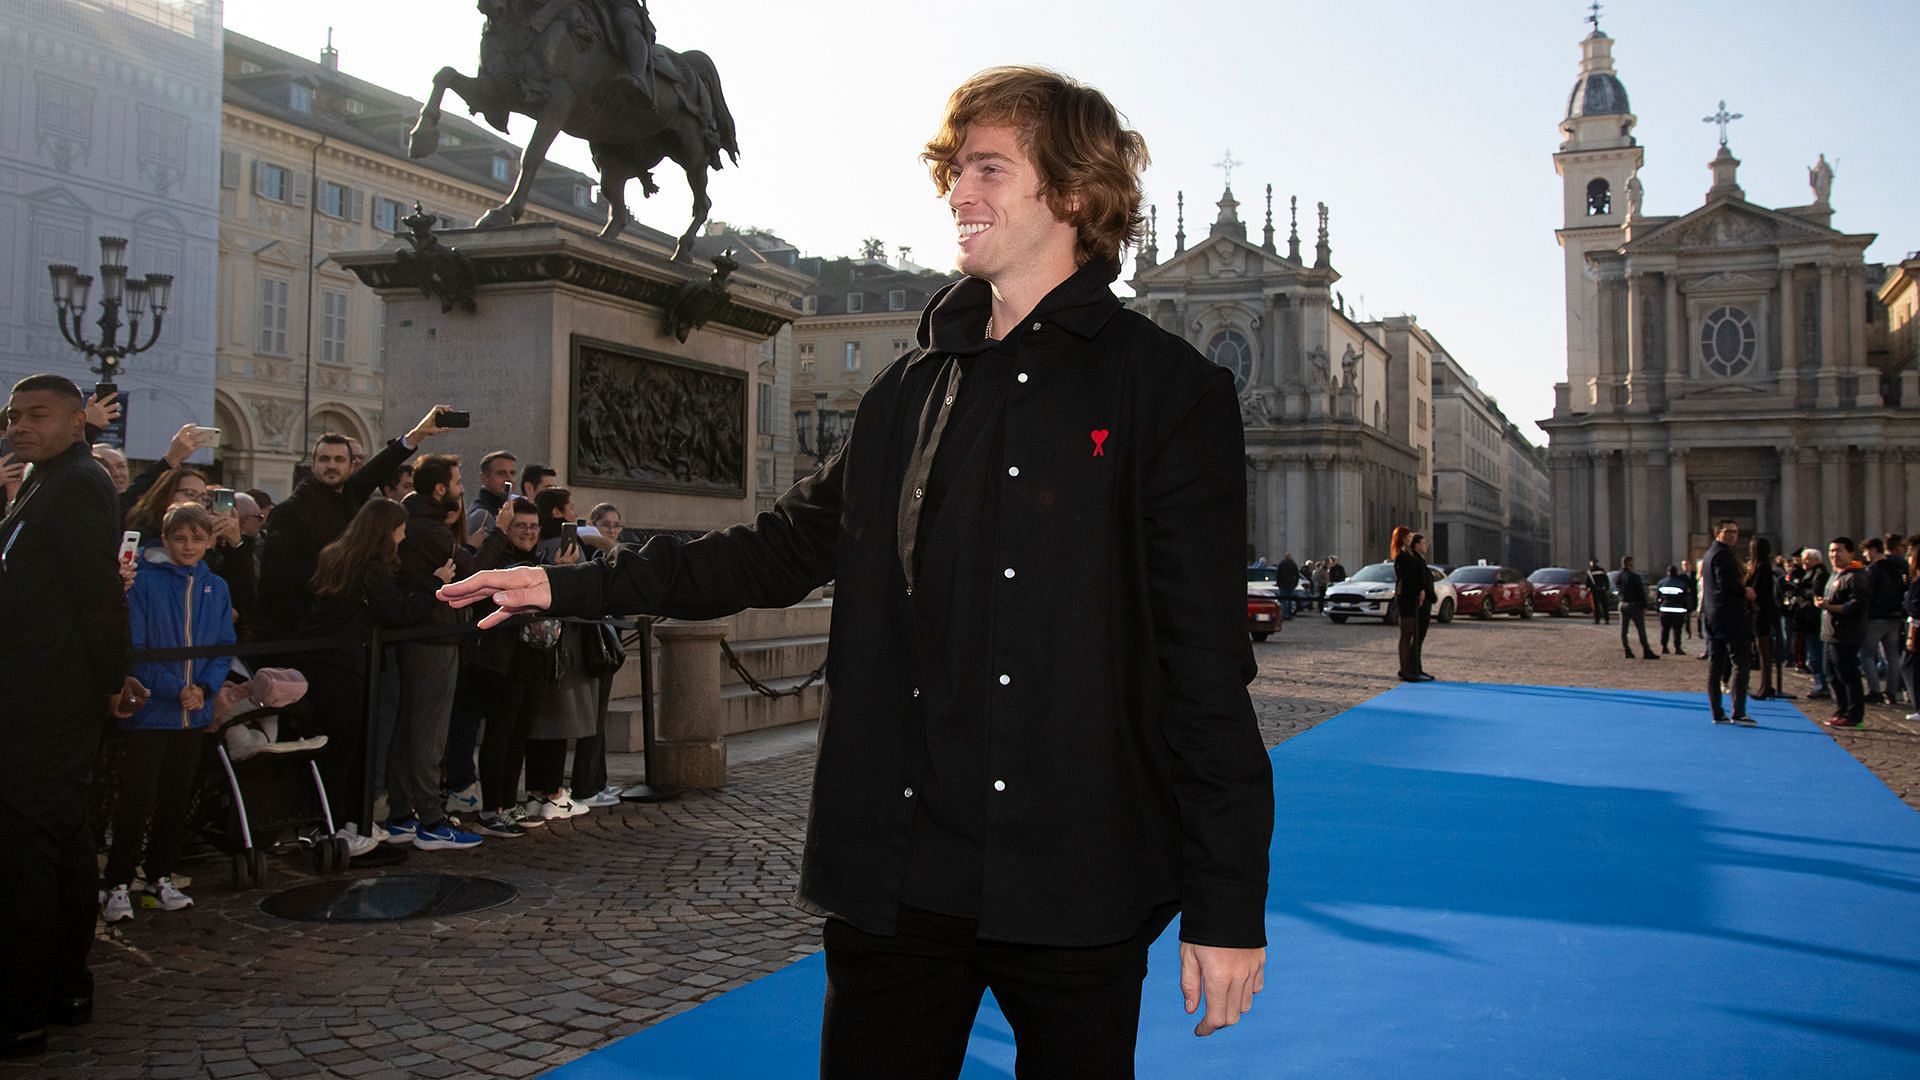 Andrey Rublev makes first court appearance in new Rublo kit, Tennis fans in love 